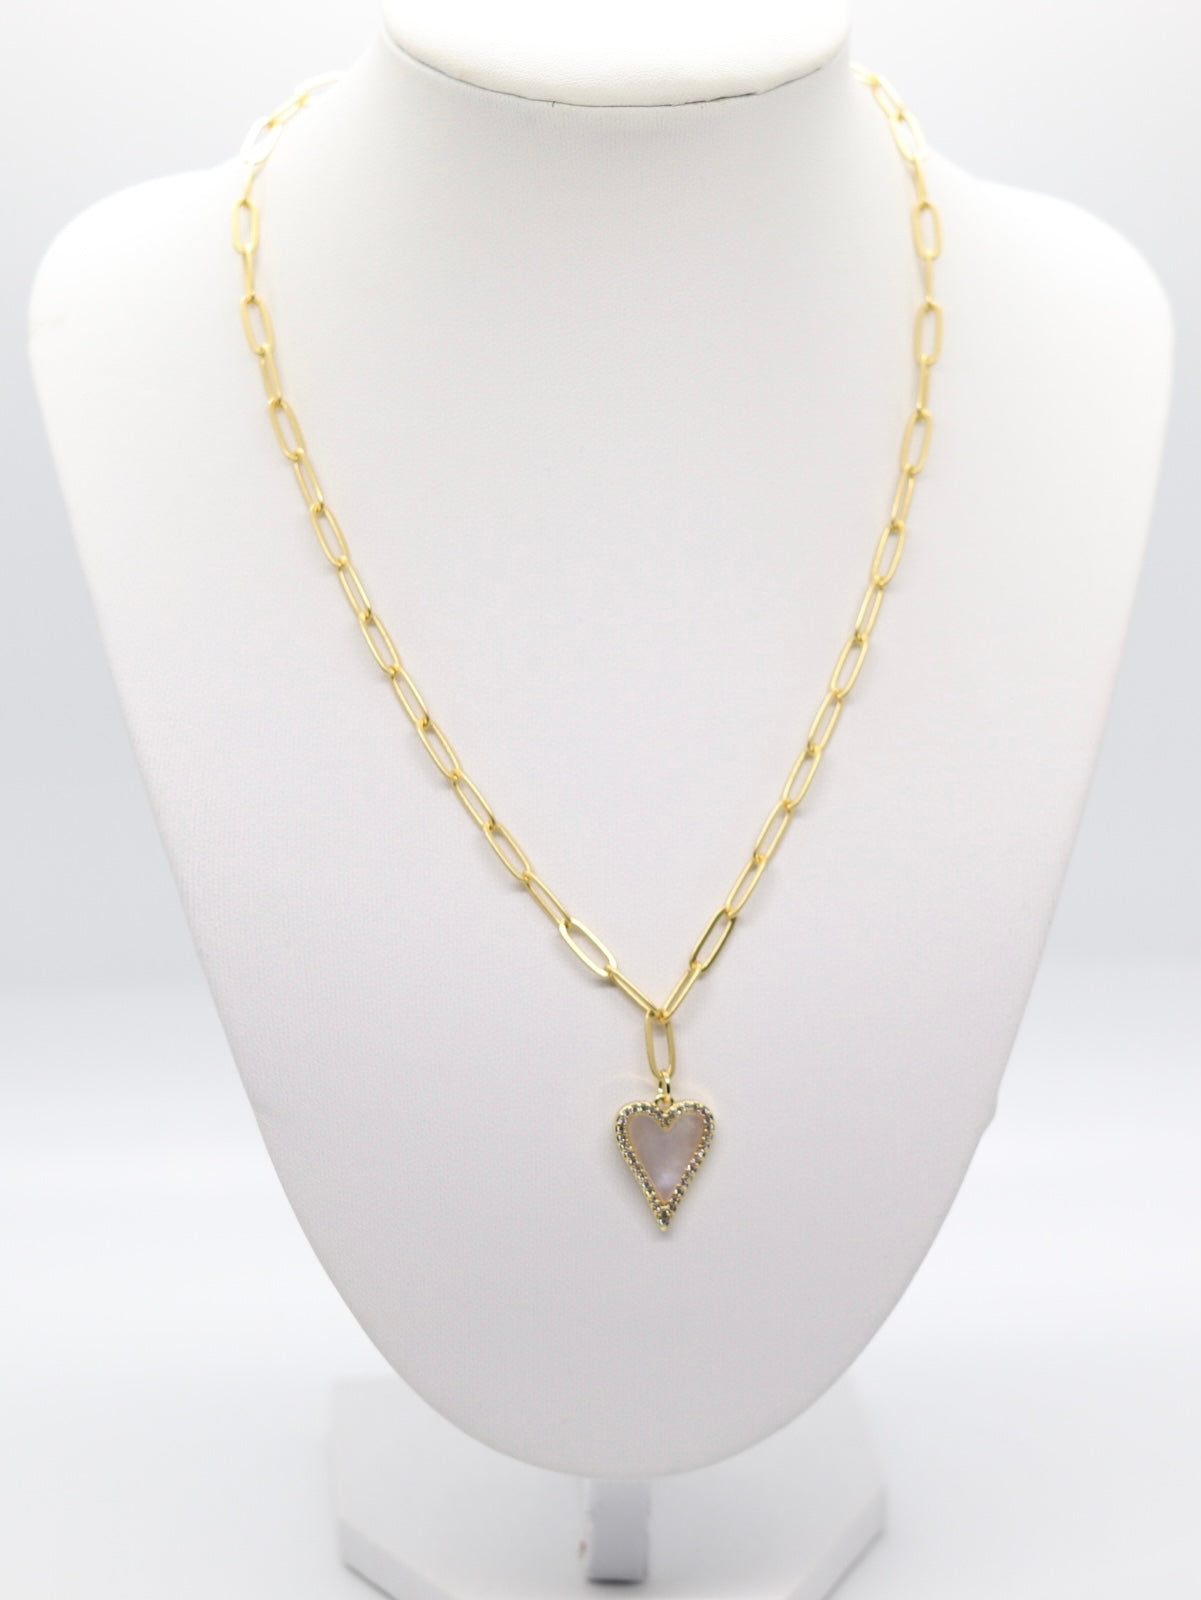 Gold 3.8mm Link Chain Necklace with Pearl Heart Shape Pendant - 18 inches